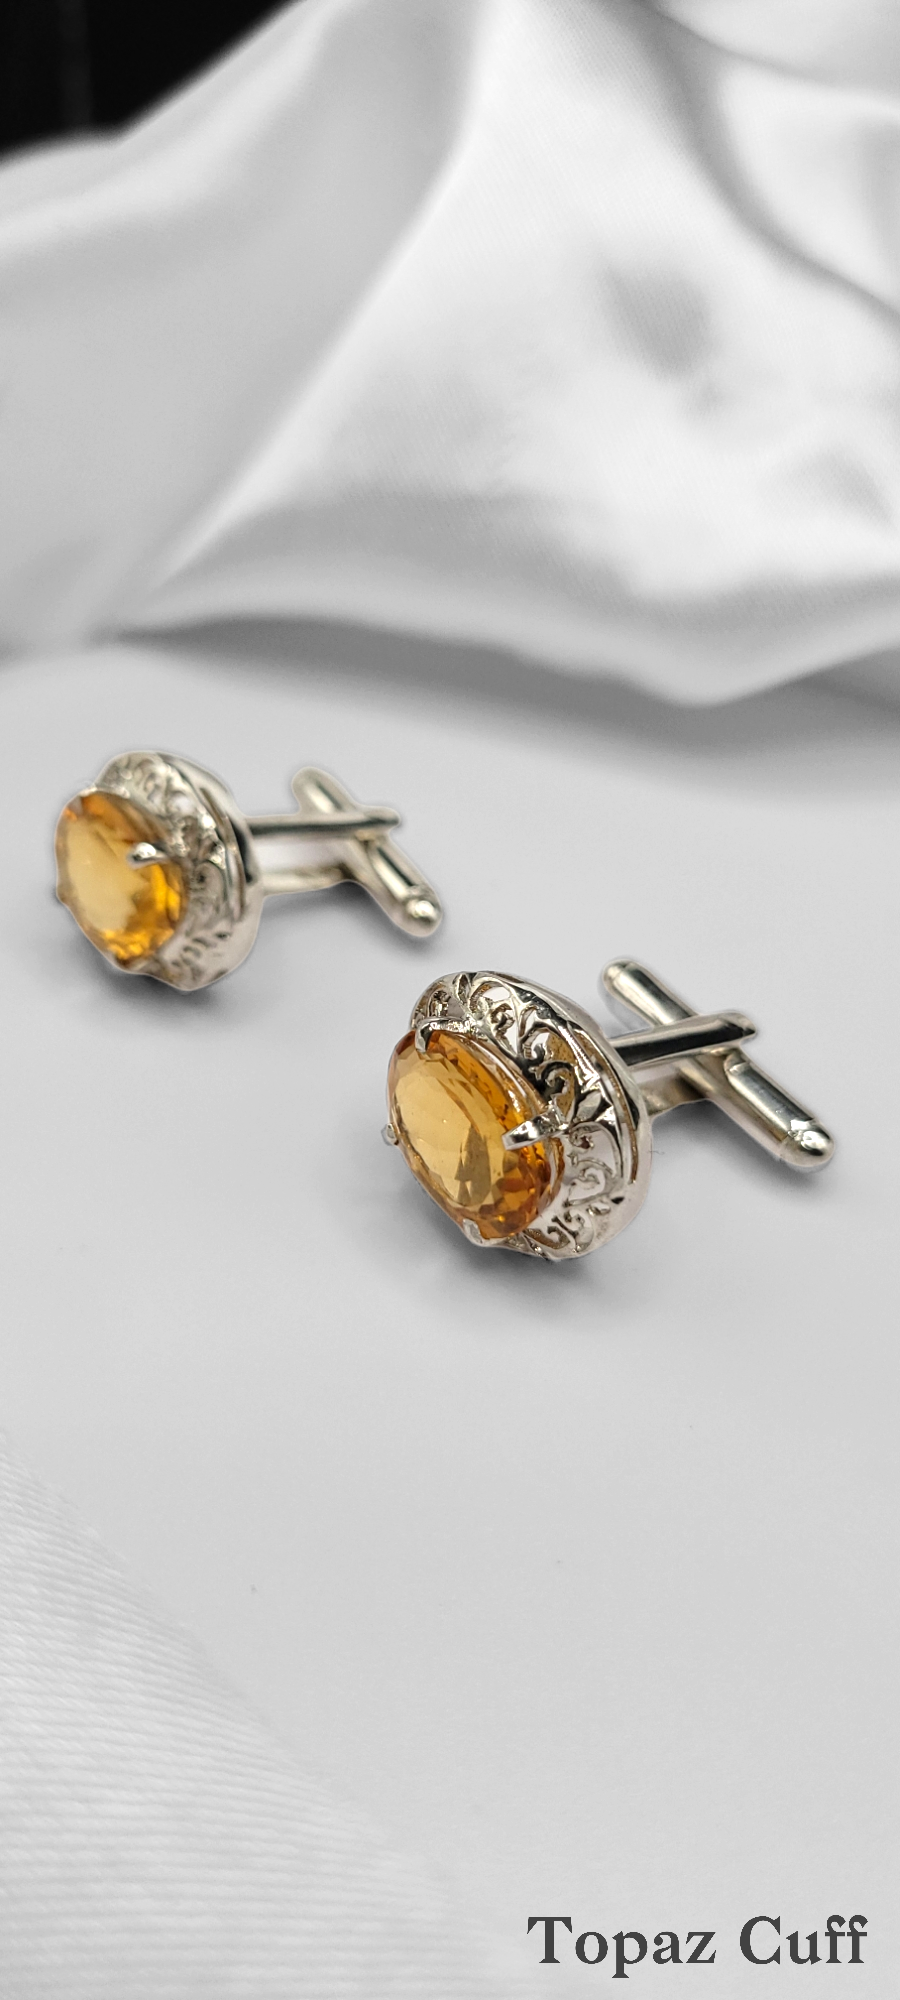 TOPAZ CUFF LINKZ ON STERLING SILVER. BEST KNOWN AS A STONE OF LOVE & GOOD FORTUNE!